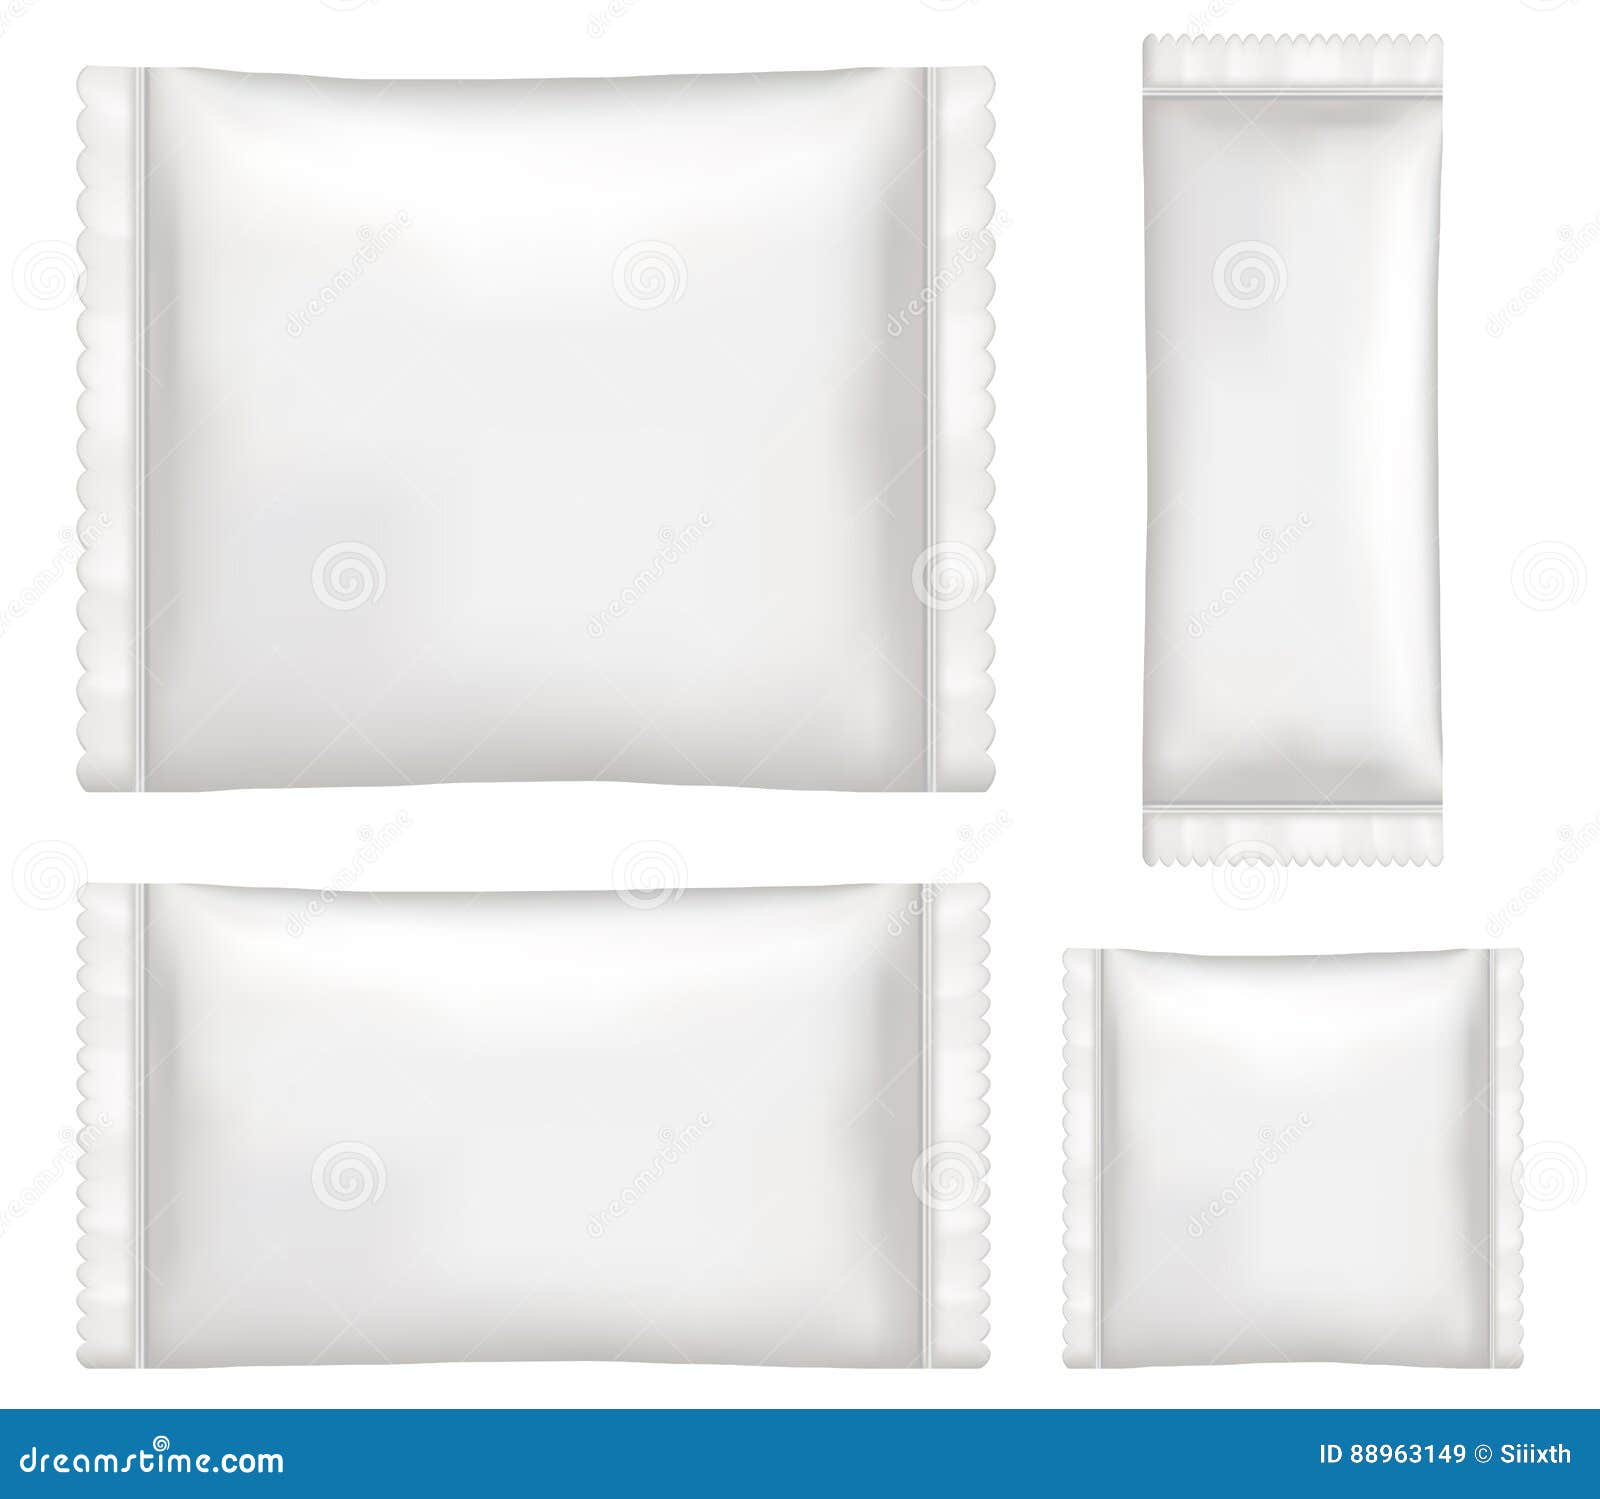 Download Top View Of White Polystyrene And Plastic Packaging Mockup Stock Vector - Illustration of mockup ...